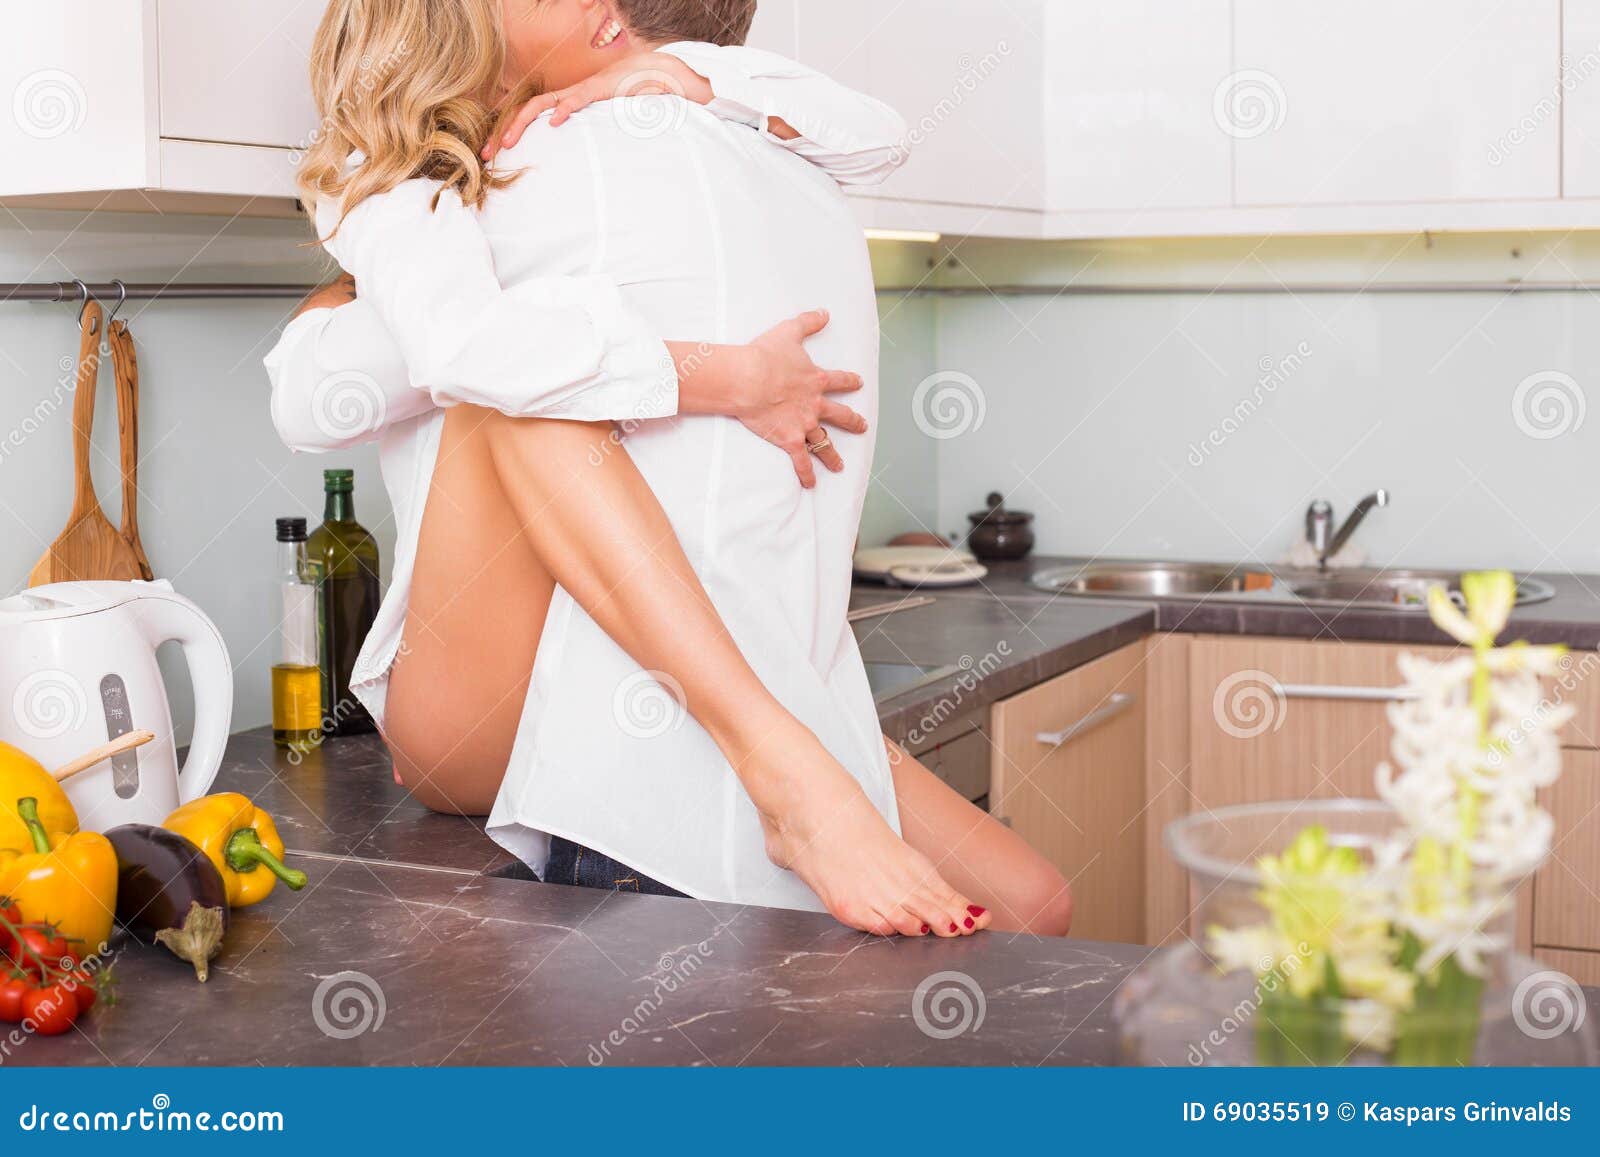 Couple Having Sex on Kitchen Counter Stock Image picture picture